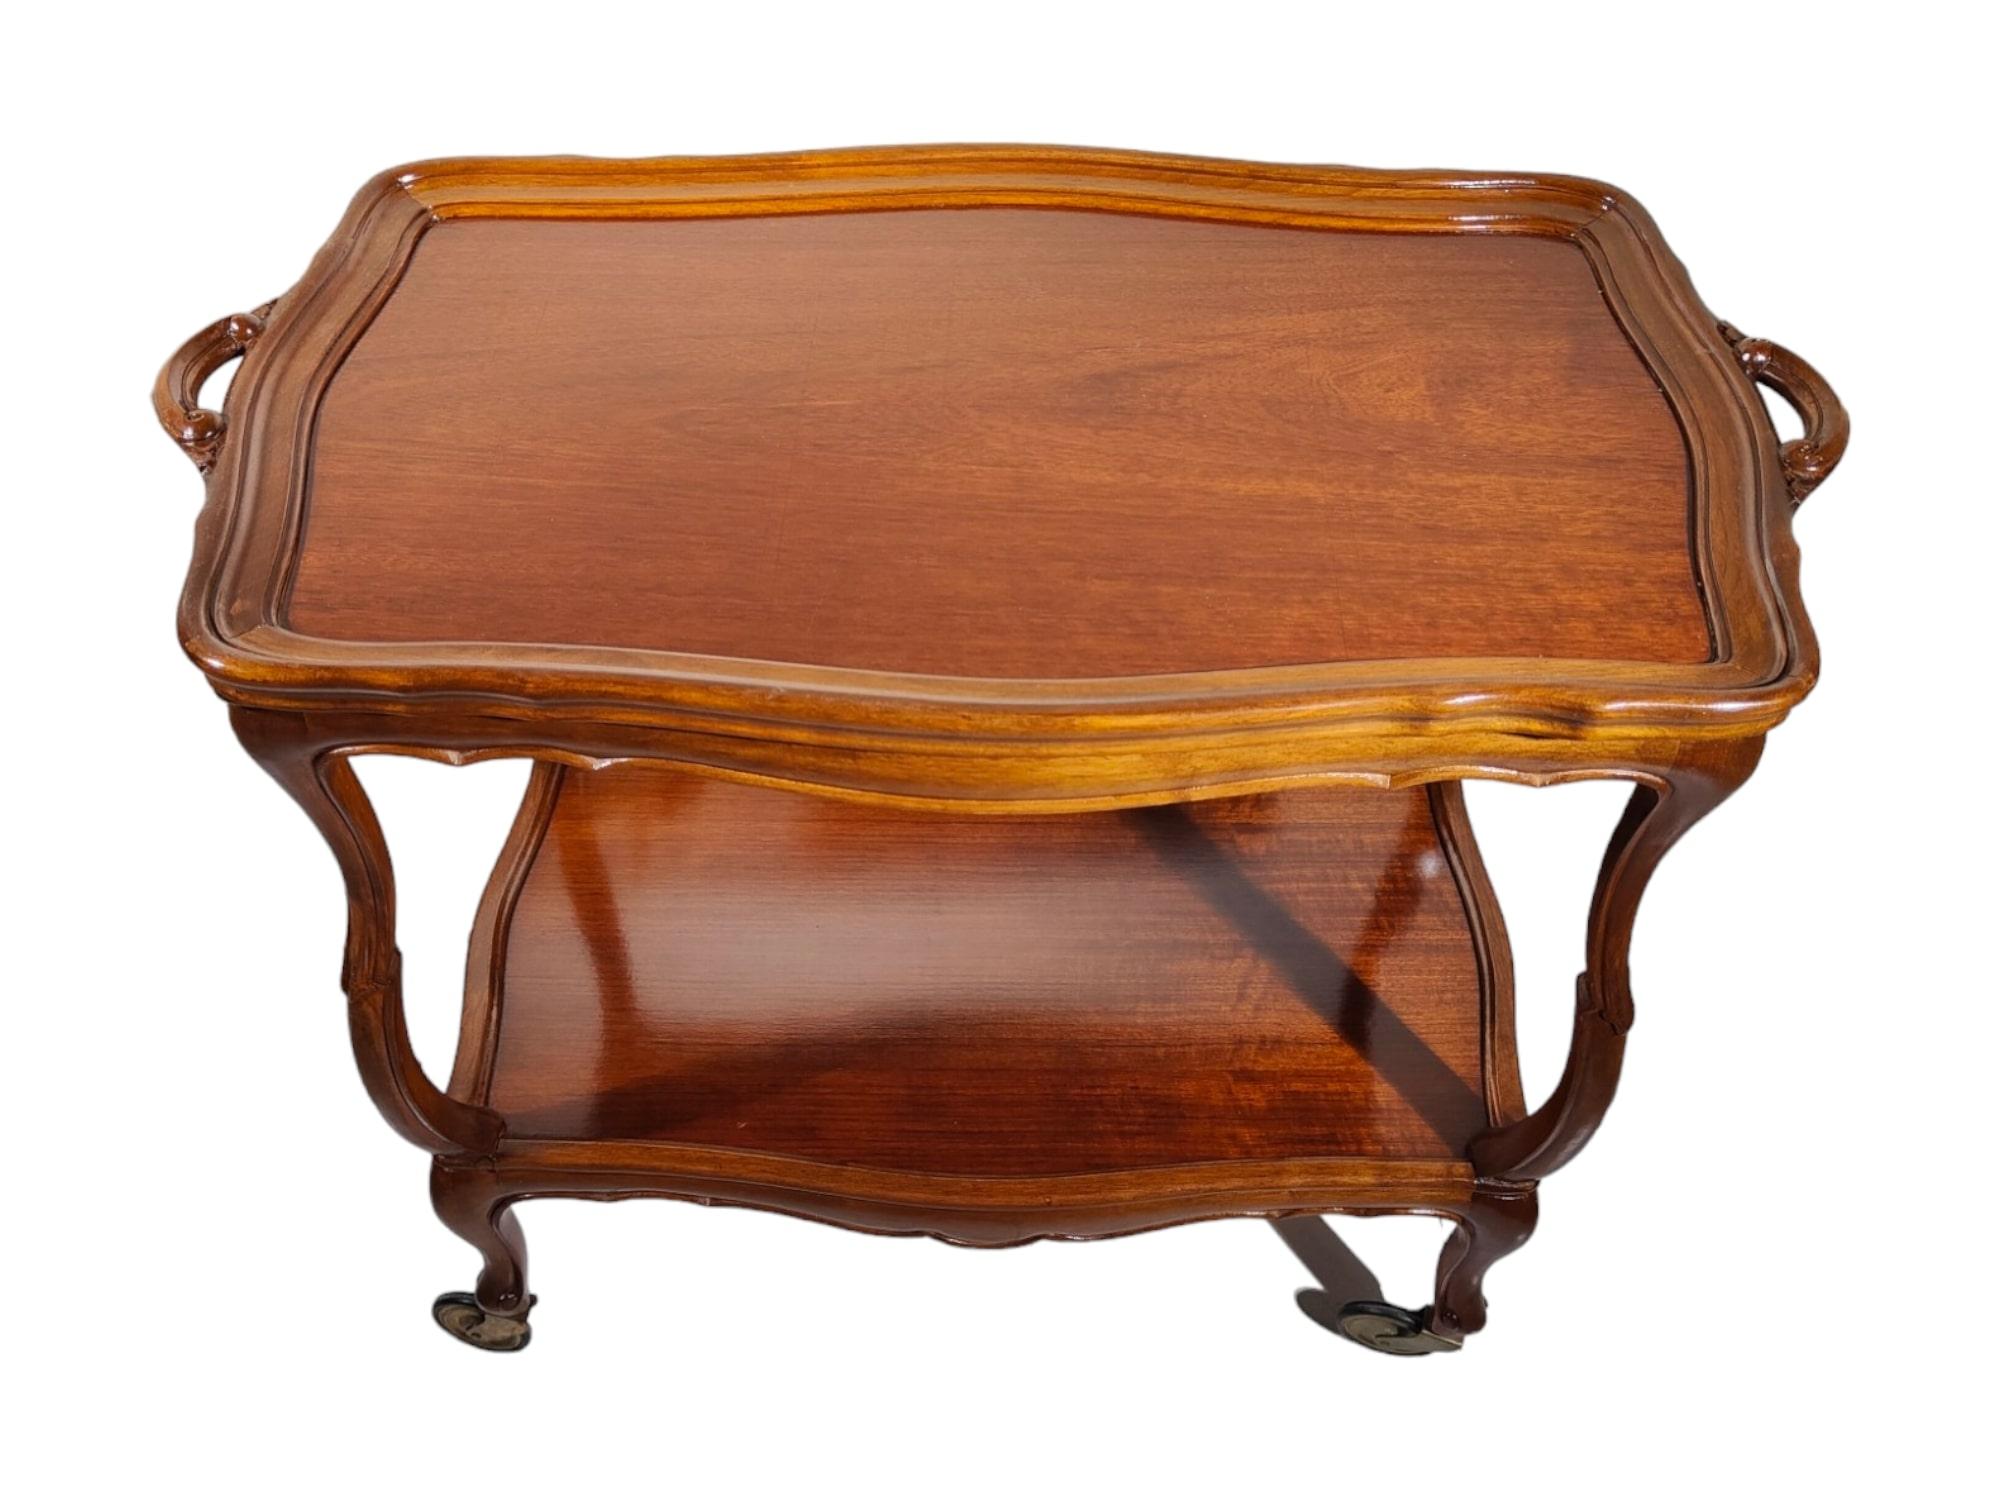 Italian Bar Cart from the 1950s - Solid Fruitwood - Removable Tray - 82x73x46 cm For Sale 2